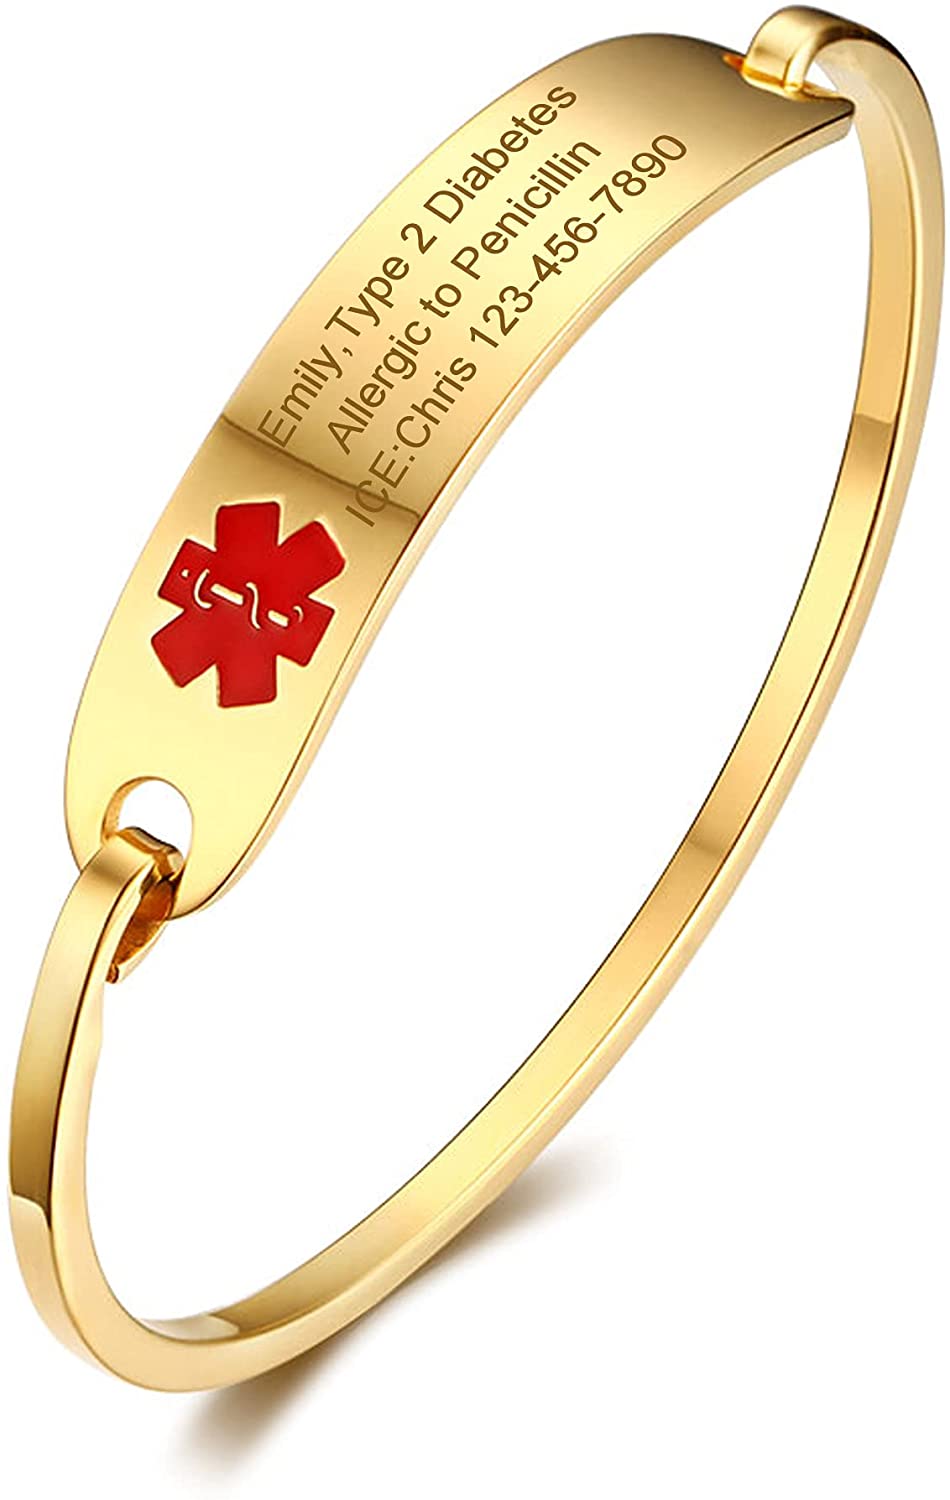 Wearing a Medical ID bracelet - Mobility Aids and Medical Equipment -  Muscular Dystrophy News Forums